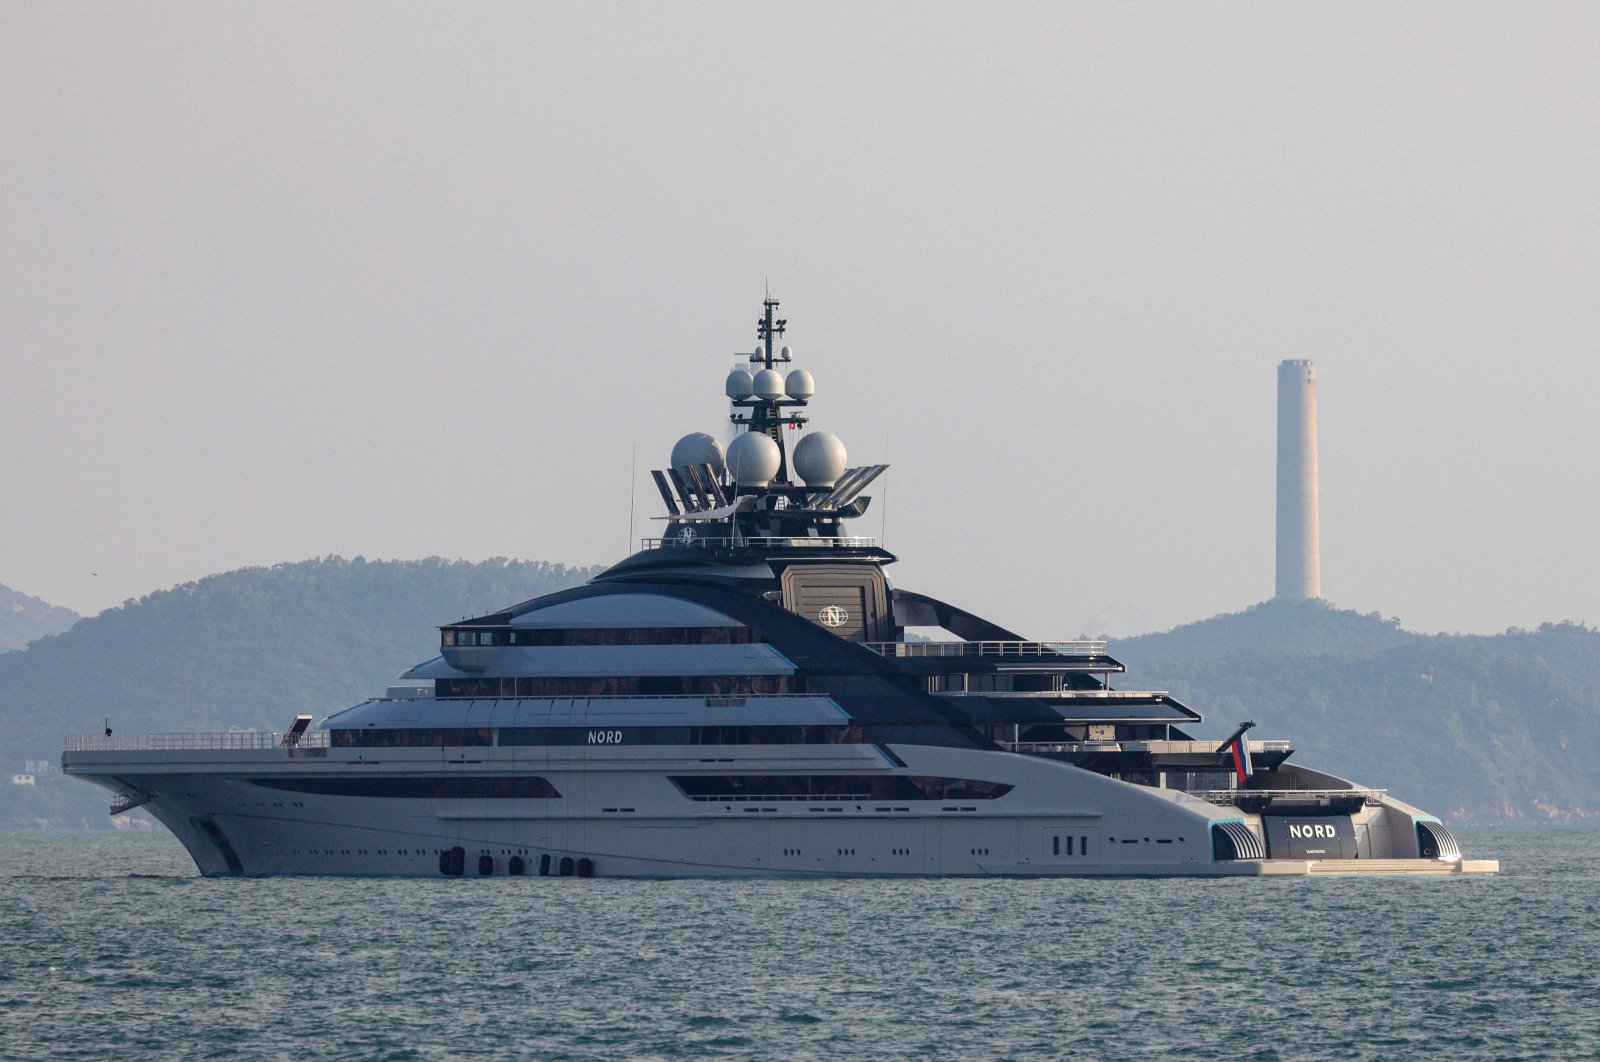 The docked 465-foot superyacht &quot;Nord,&quot; owned by the sanctioned Russian oligarch Alexey Mordashov, Hong Kong, Oct. 7, 2022. (Reuters Photo)